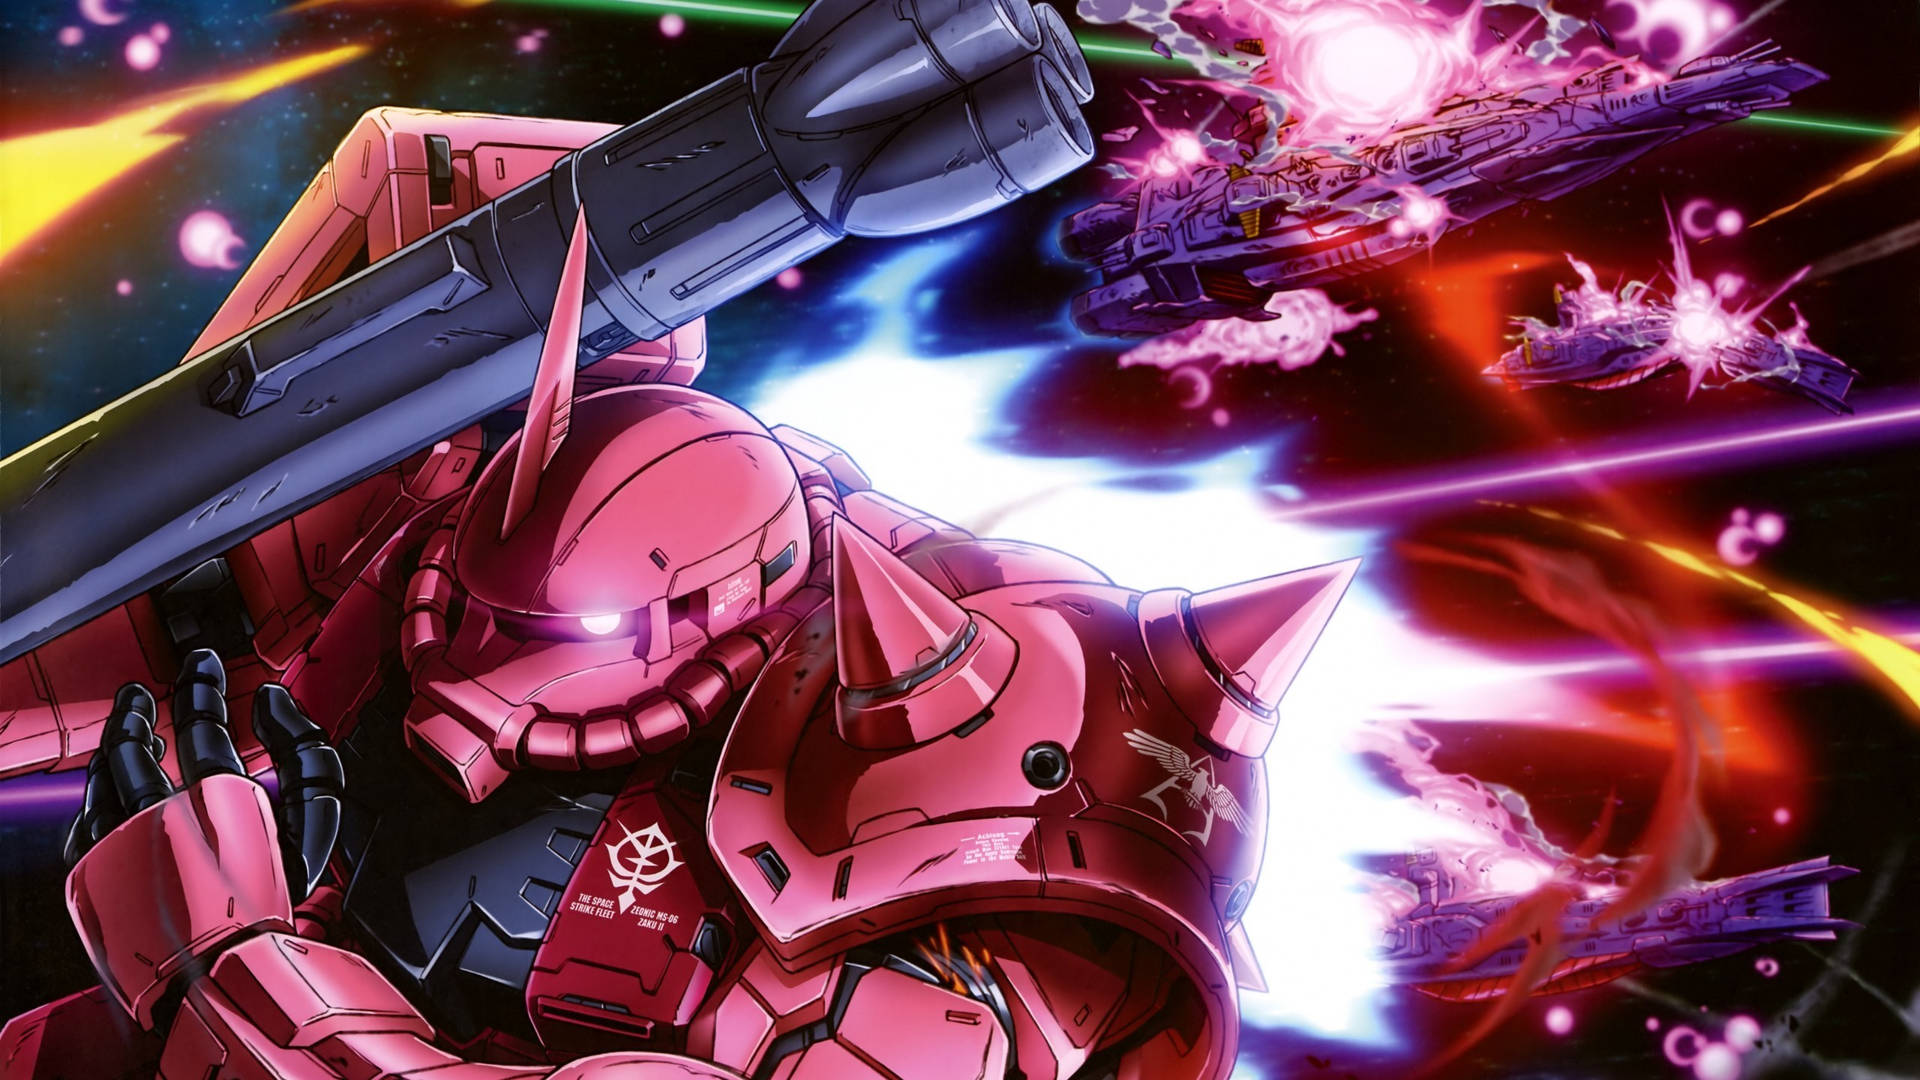 Mobile Suit Gundam A Carrying Rocket Background